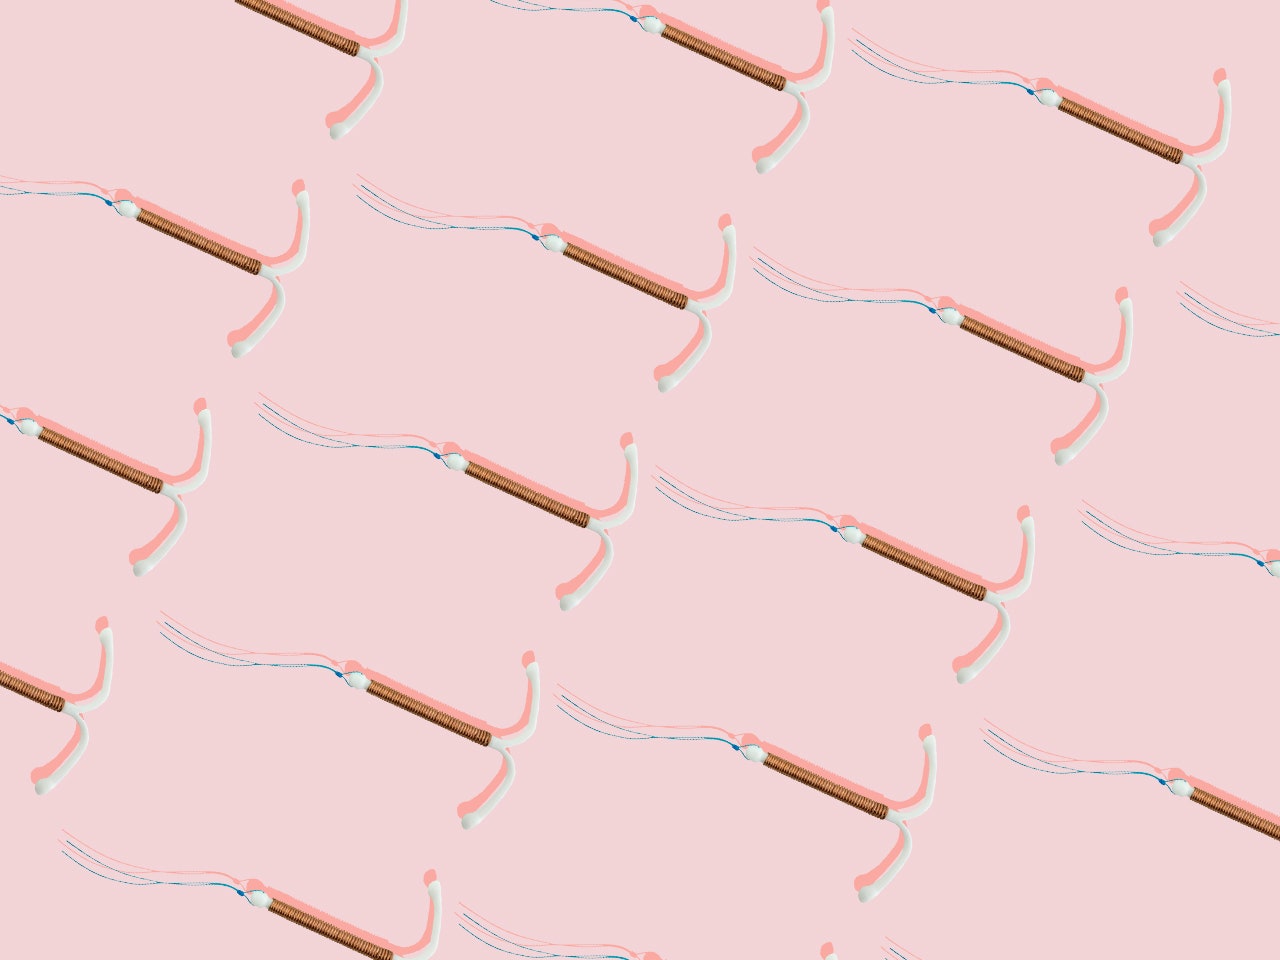 Discovering the facts about Paragard IUD: